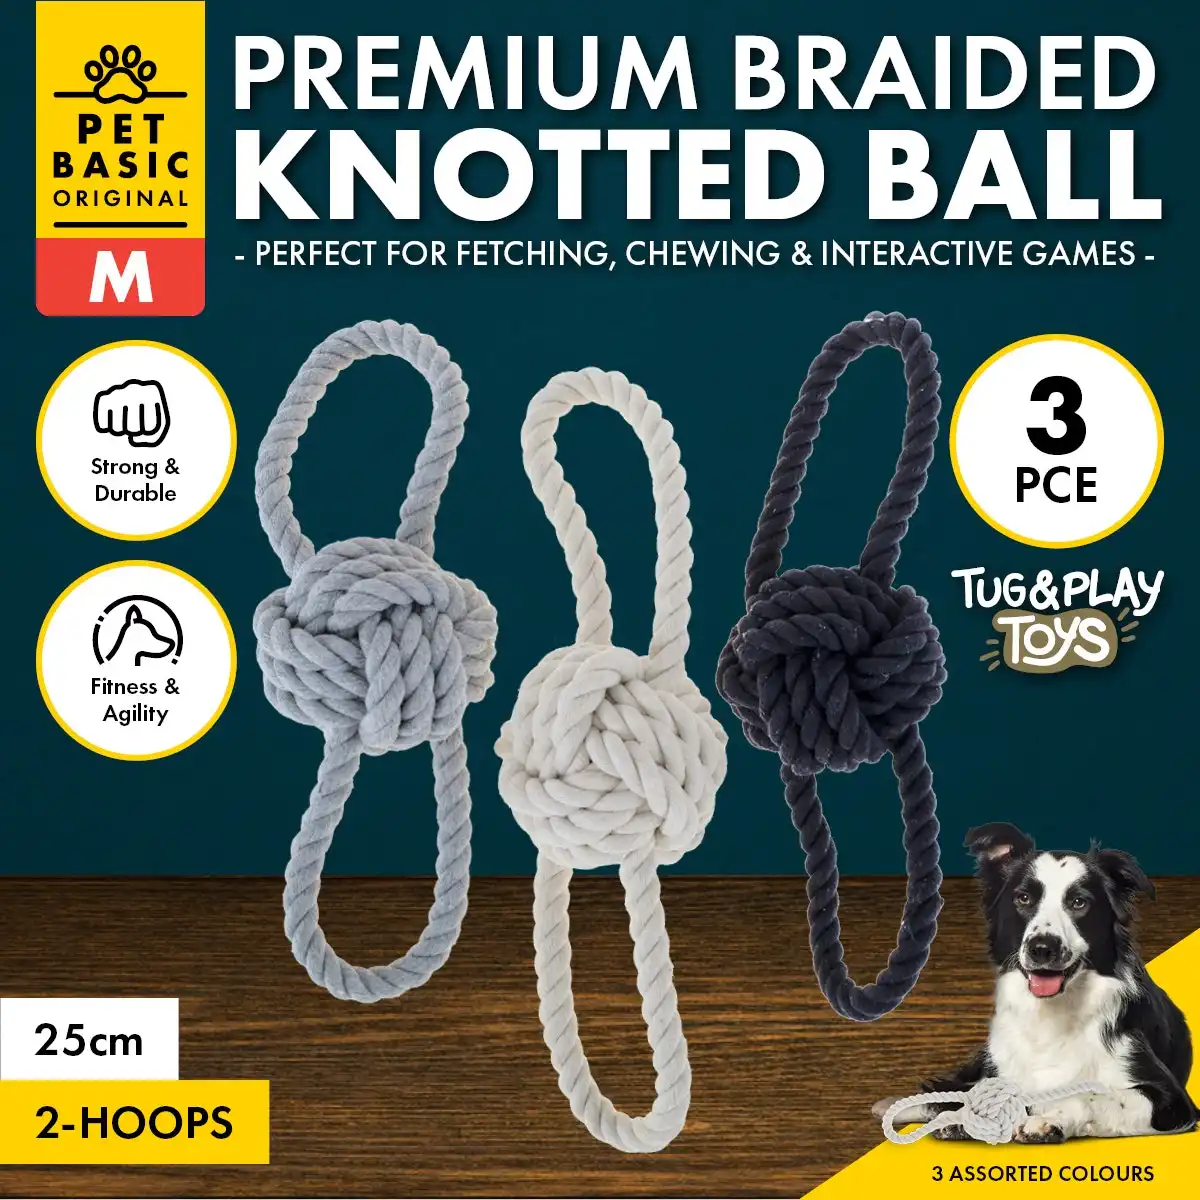 Pet Basic® 3PCE Premium Braided Rope Knotted Ball & Loops Natural Fibres 25cm